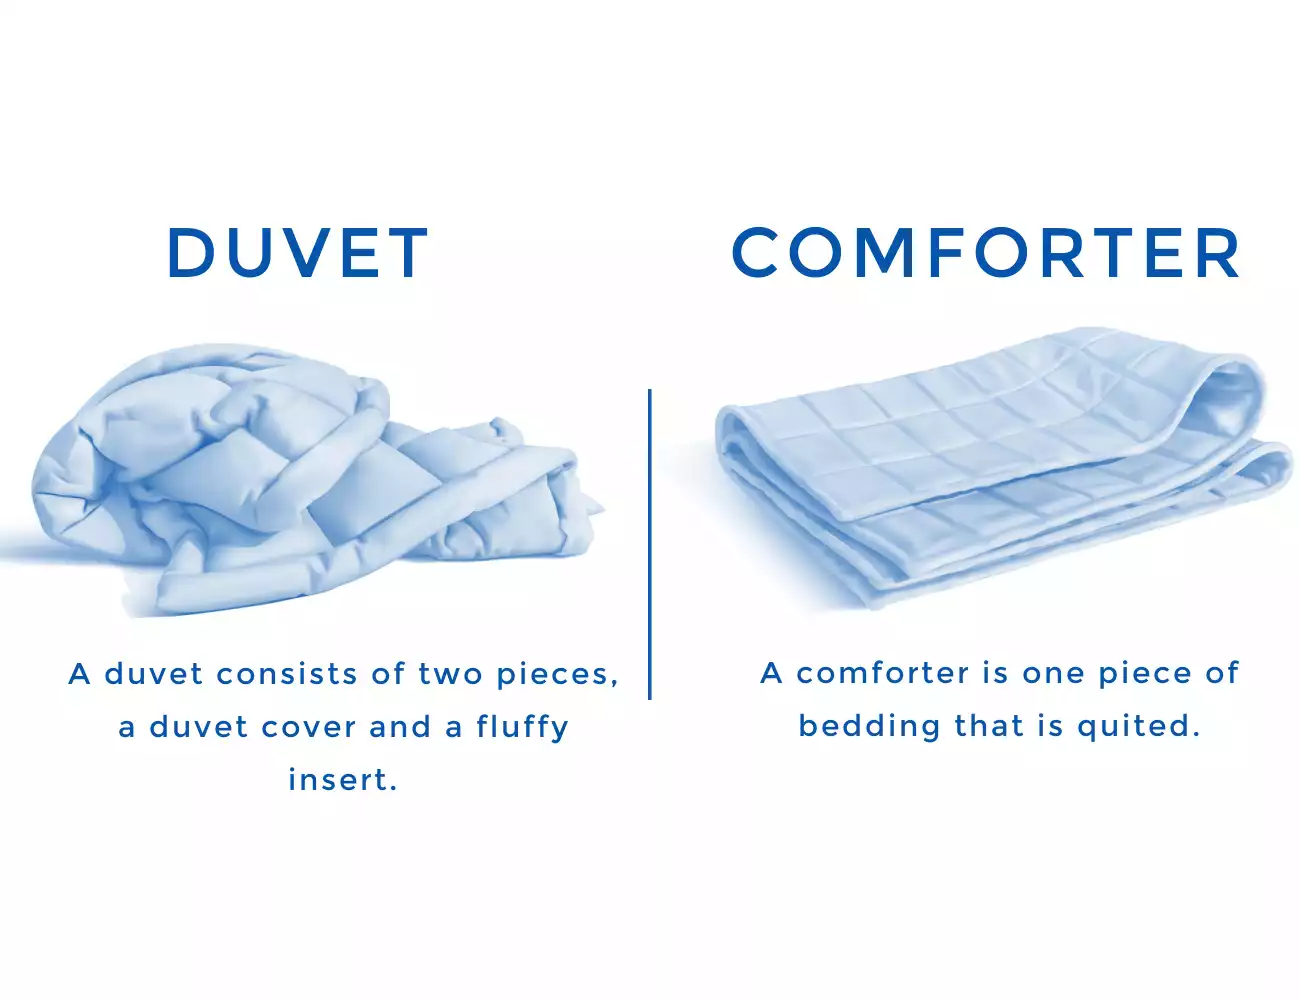 Duvet vs. Comforter: The Similarities and Differences